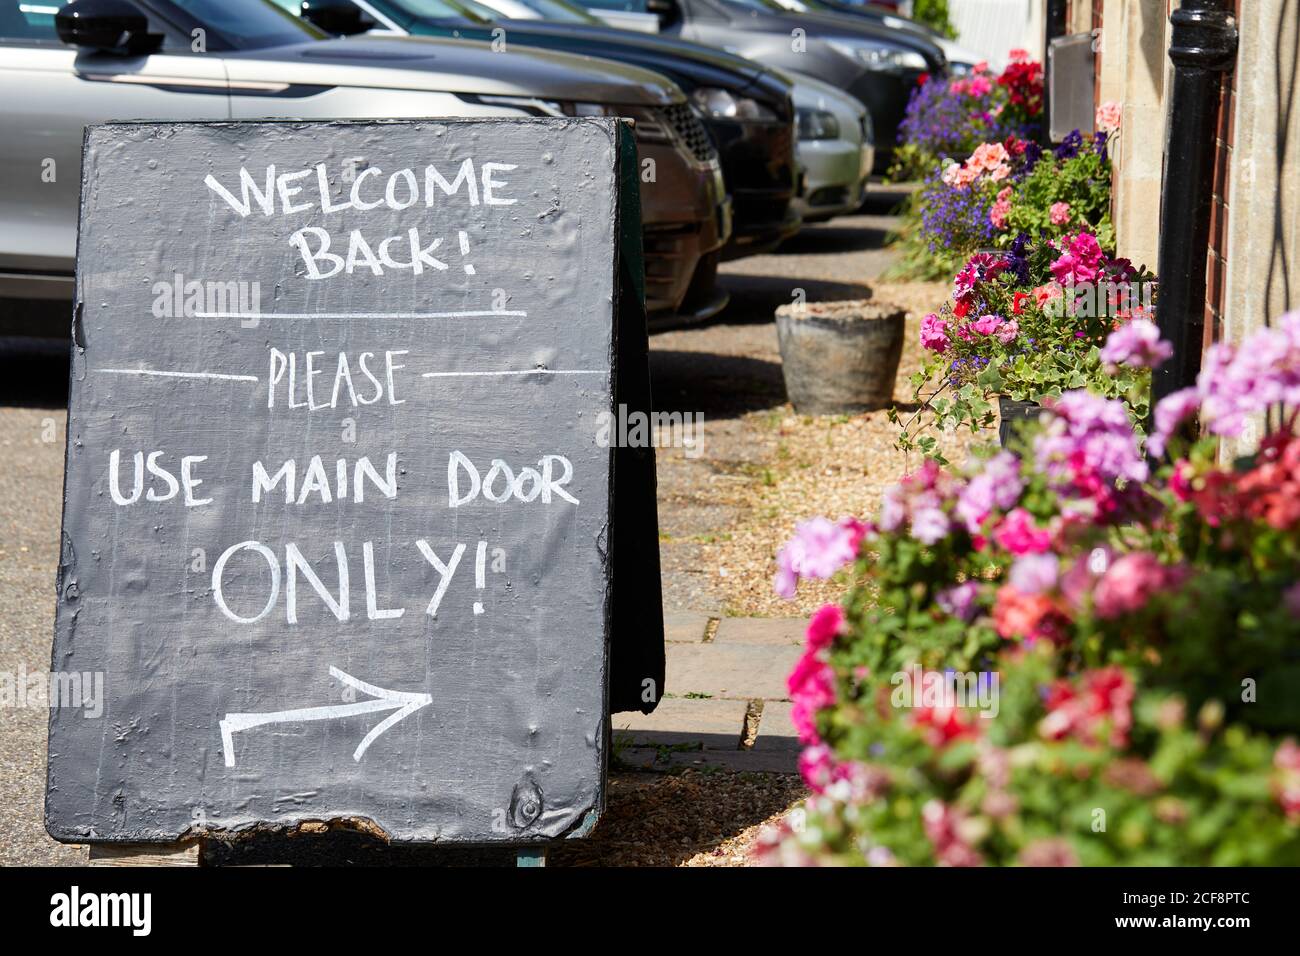 Fordingbridge, UK. - August 12, 2020: A sign welcomes back customers ito a pub after reopening following the COVID-19 pandemic. Stock Photo